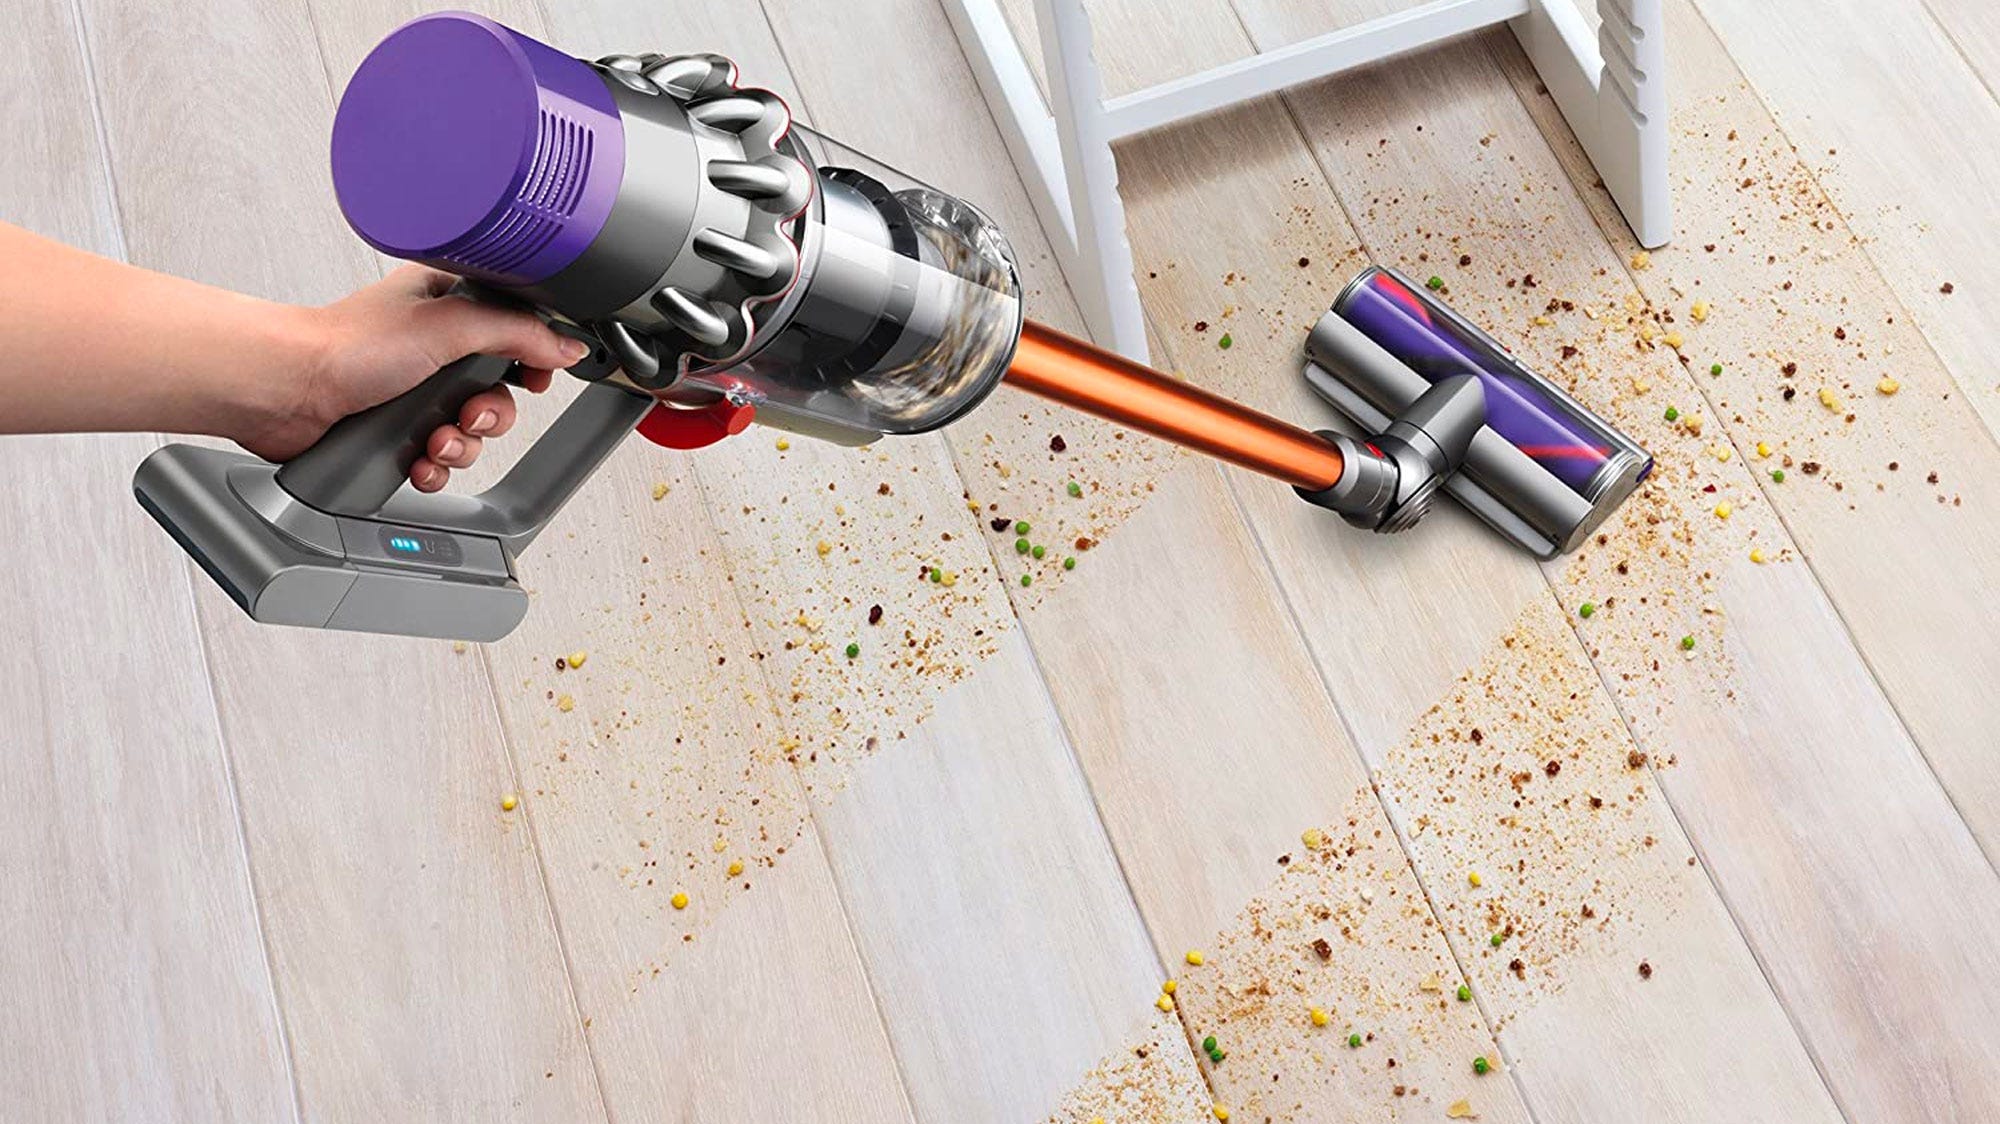 Dyson deals: Save $150 on two of best vacuums ever tried